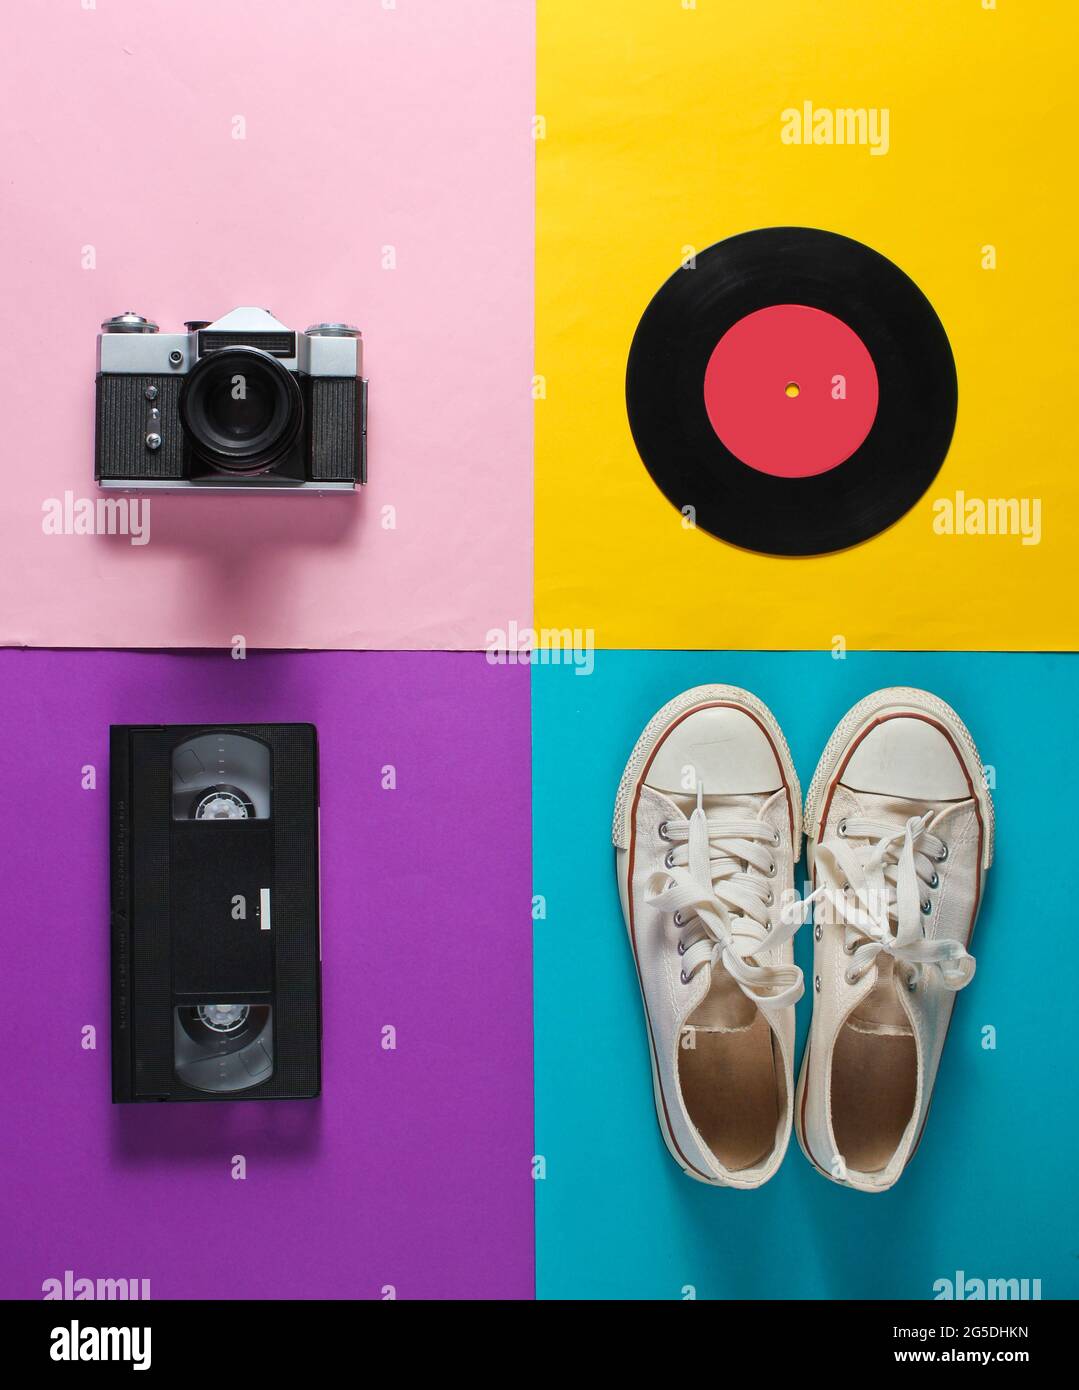 https://c8.alamy.com/comp/2G5DHKN/retro-still-life-old-fashioned-sneakers-vinyl-record-vintage-film-camera-video-cassette-on-colored-background-top-view-pop-art-flat-lay-2G5DHKN.jpg